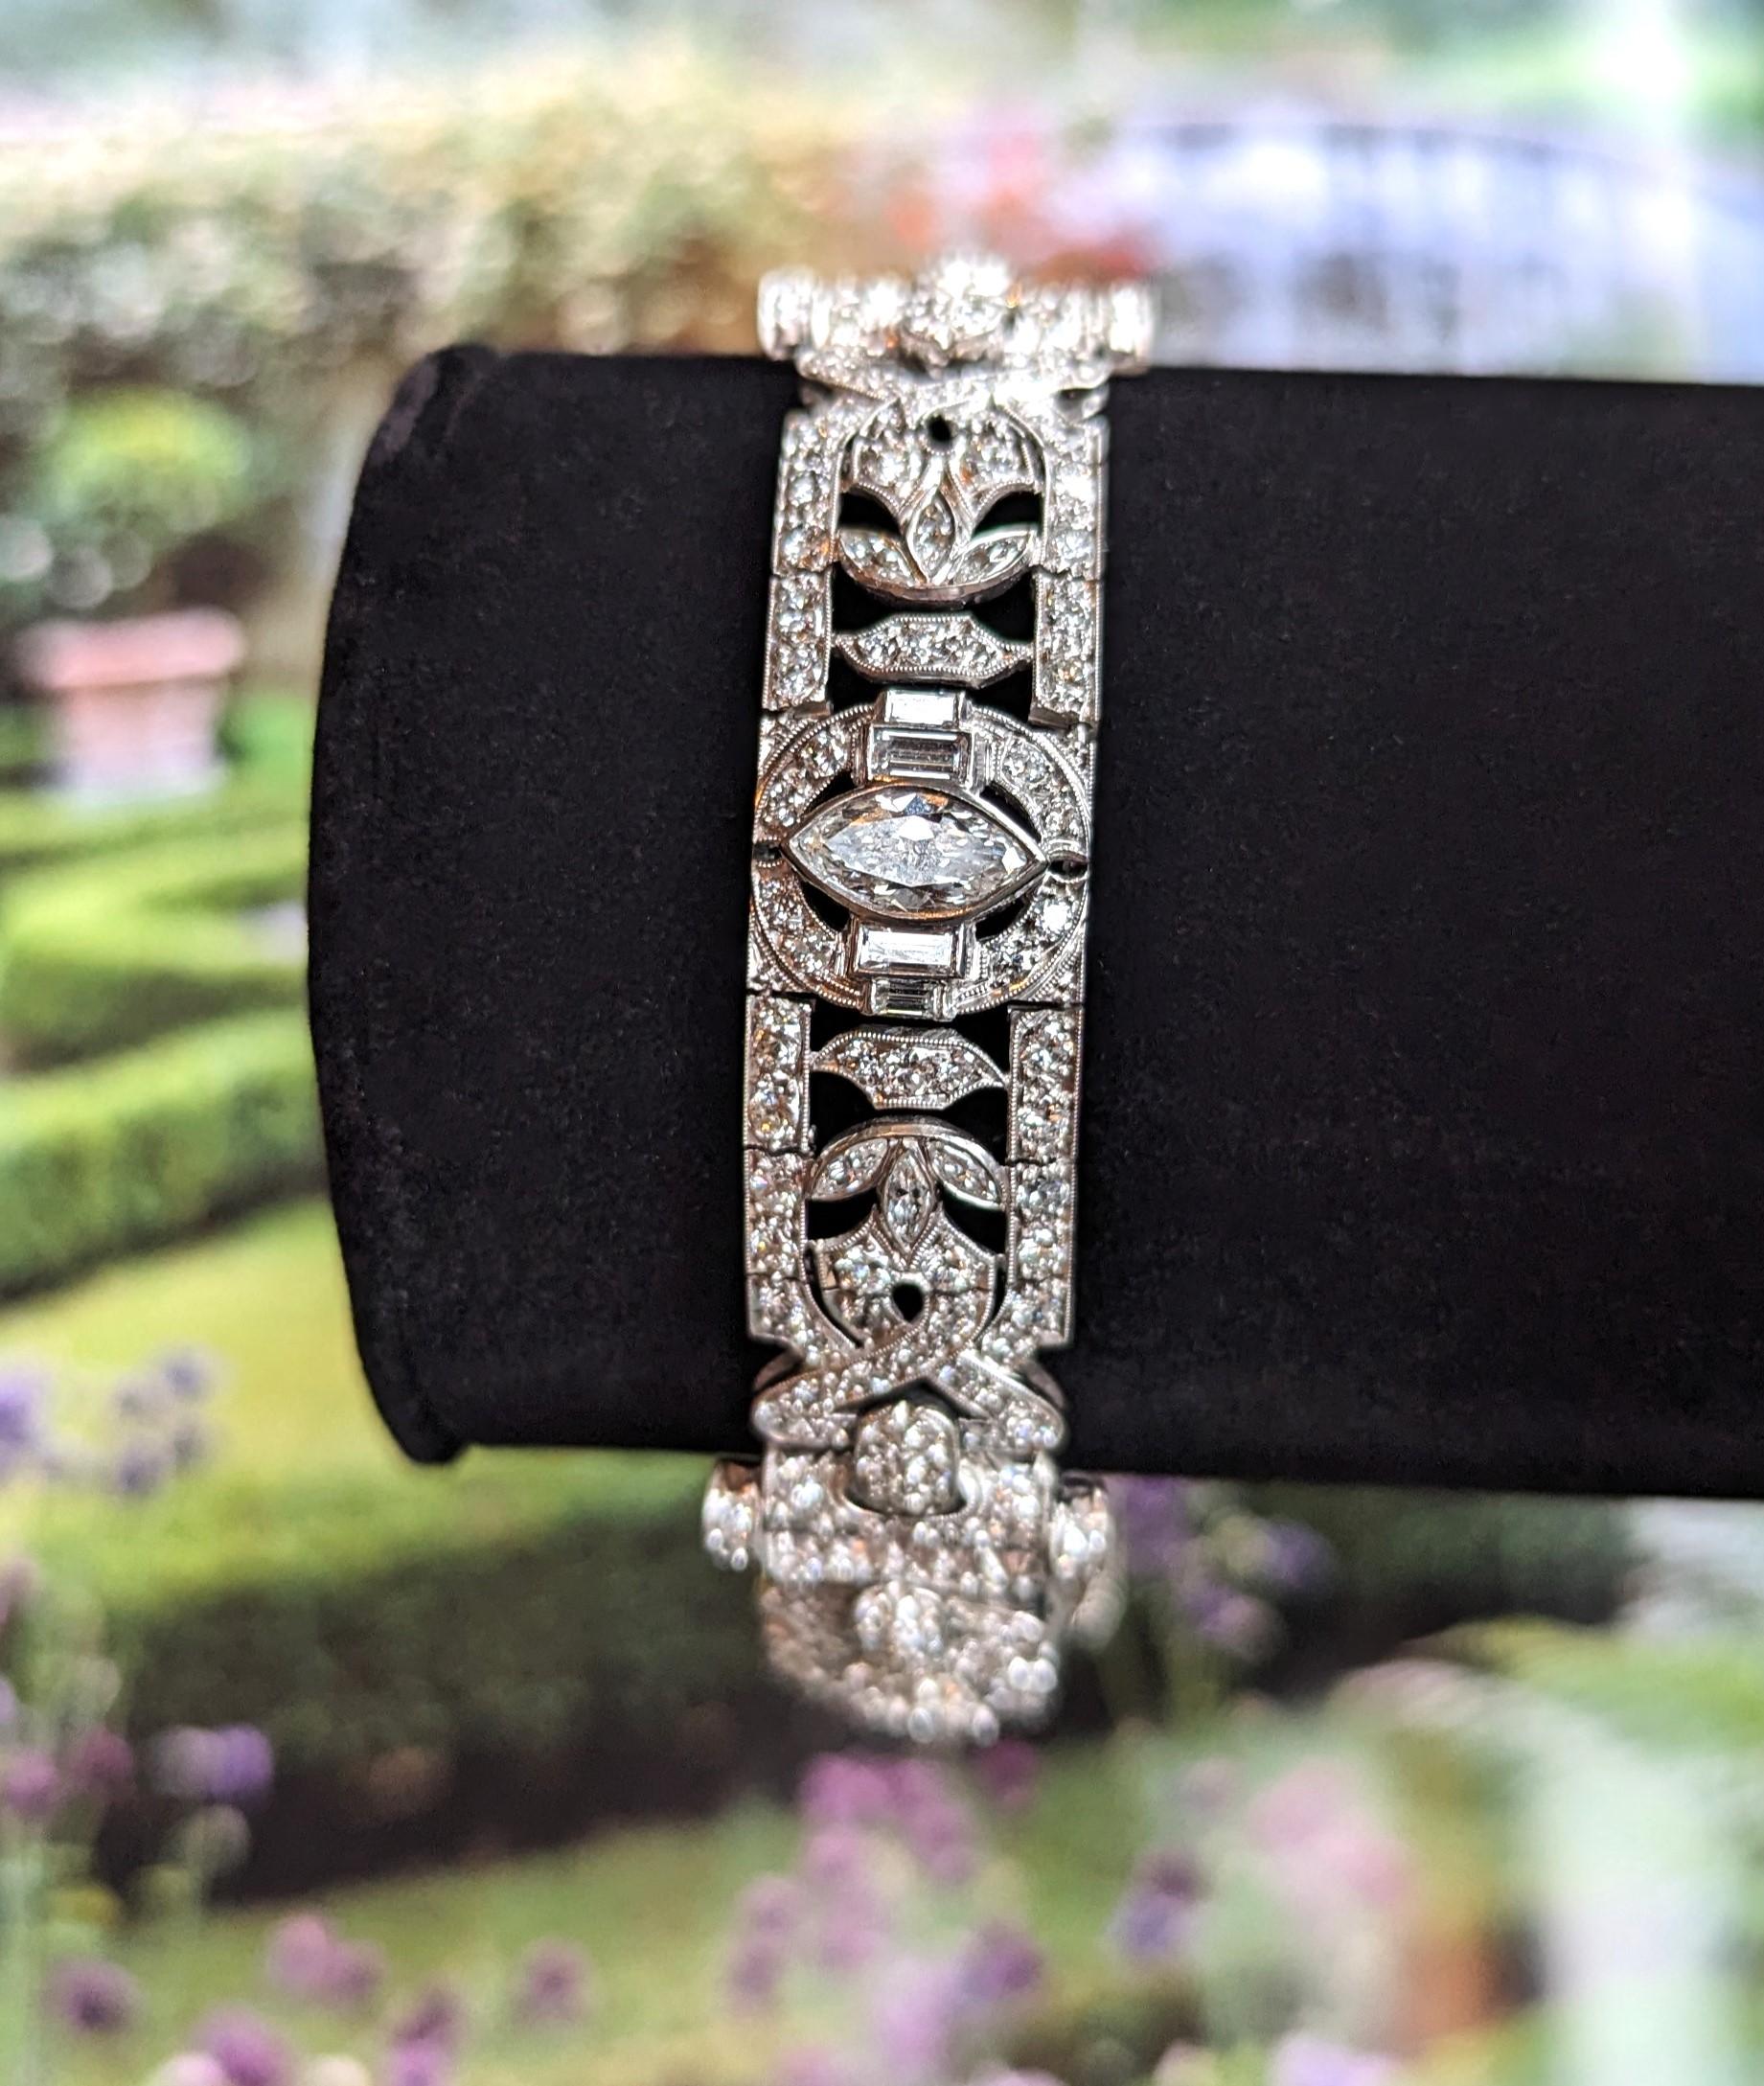 Lady's Art Deco diamond link bracelet is made in platinum, not stamped or marked. Weighs 22.3 pennyweights, cast and hand assembled constructions, bright finish, workmanship shows great attention to detail. Settings are secure, stones are level,